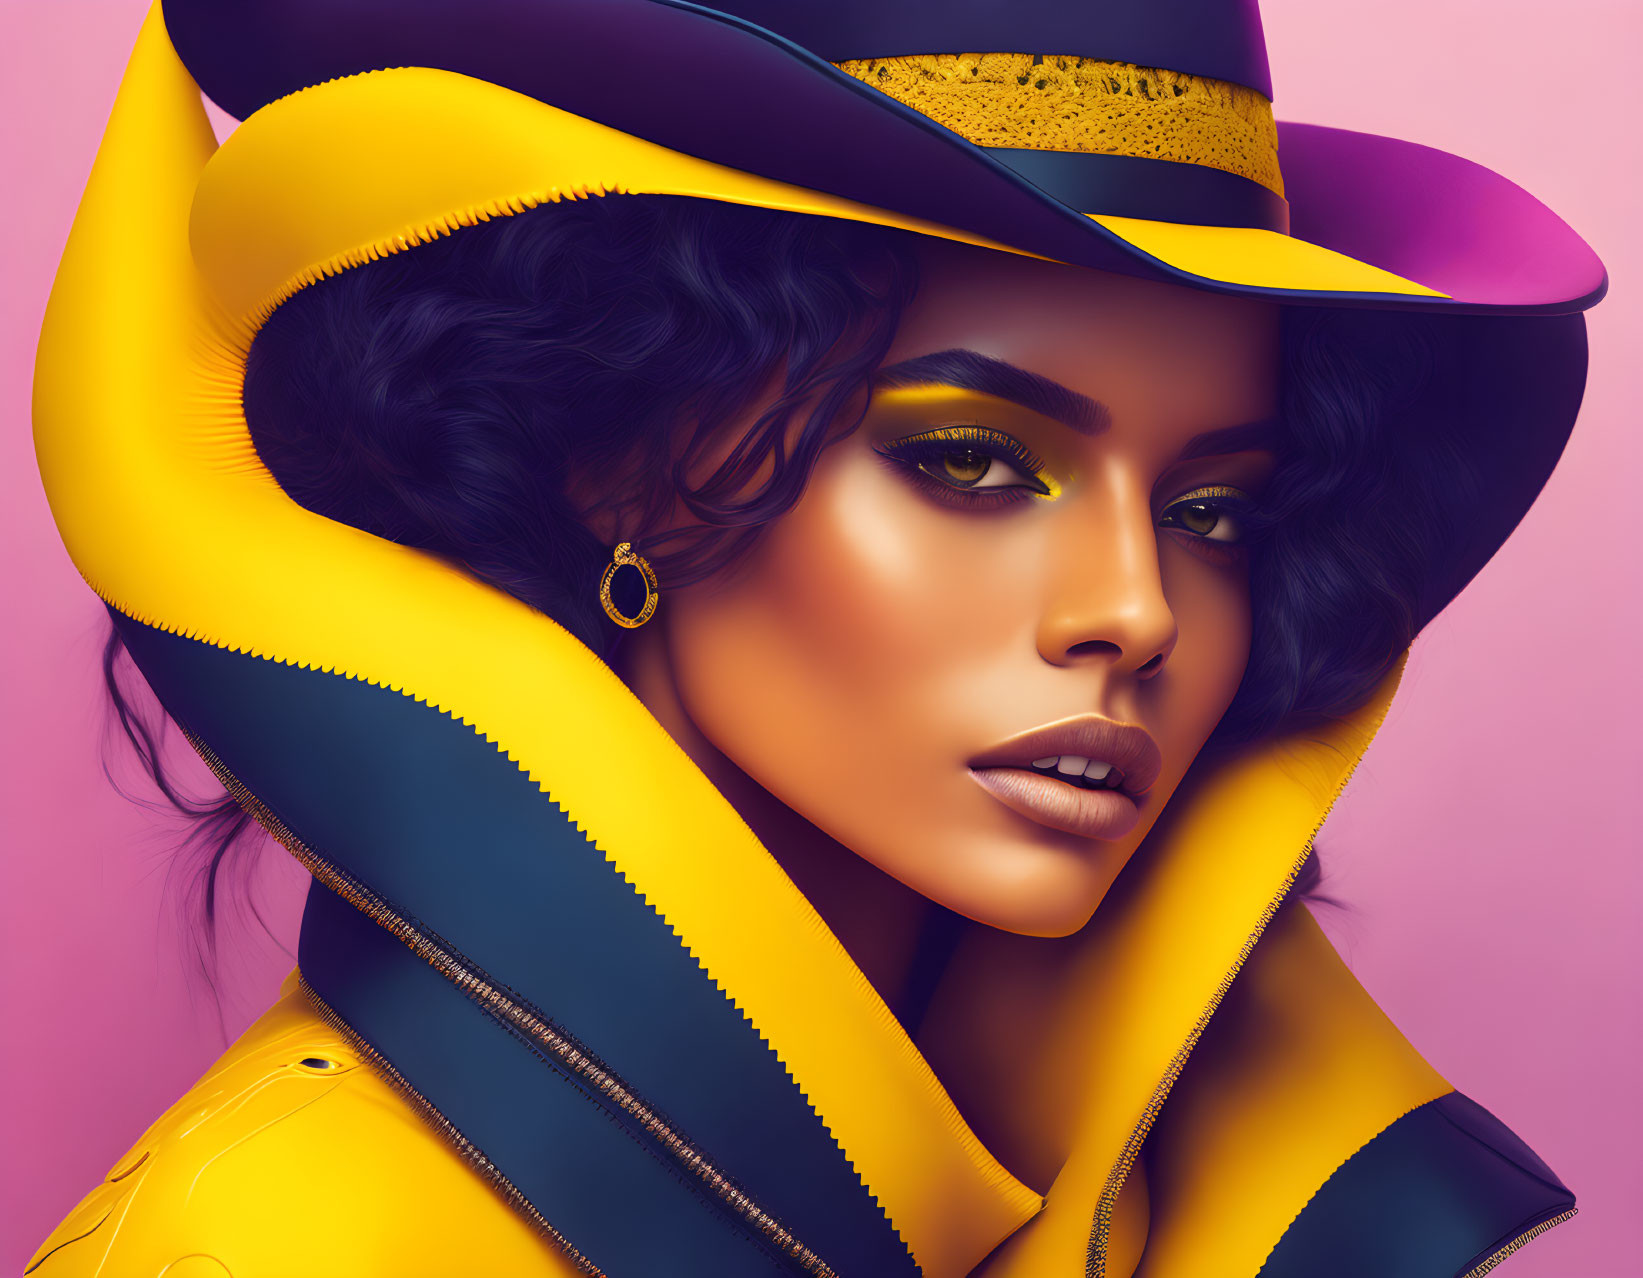 Digital illustration of woman with dramatic makeup and bold yellow and blue outfit & hat.